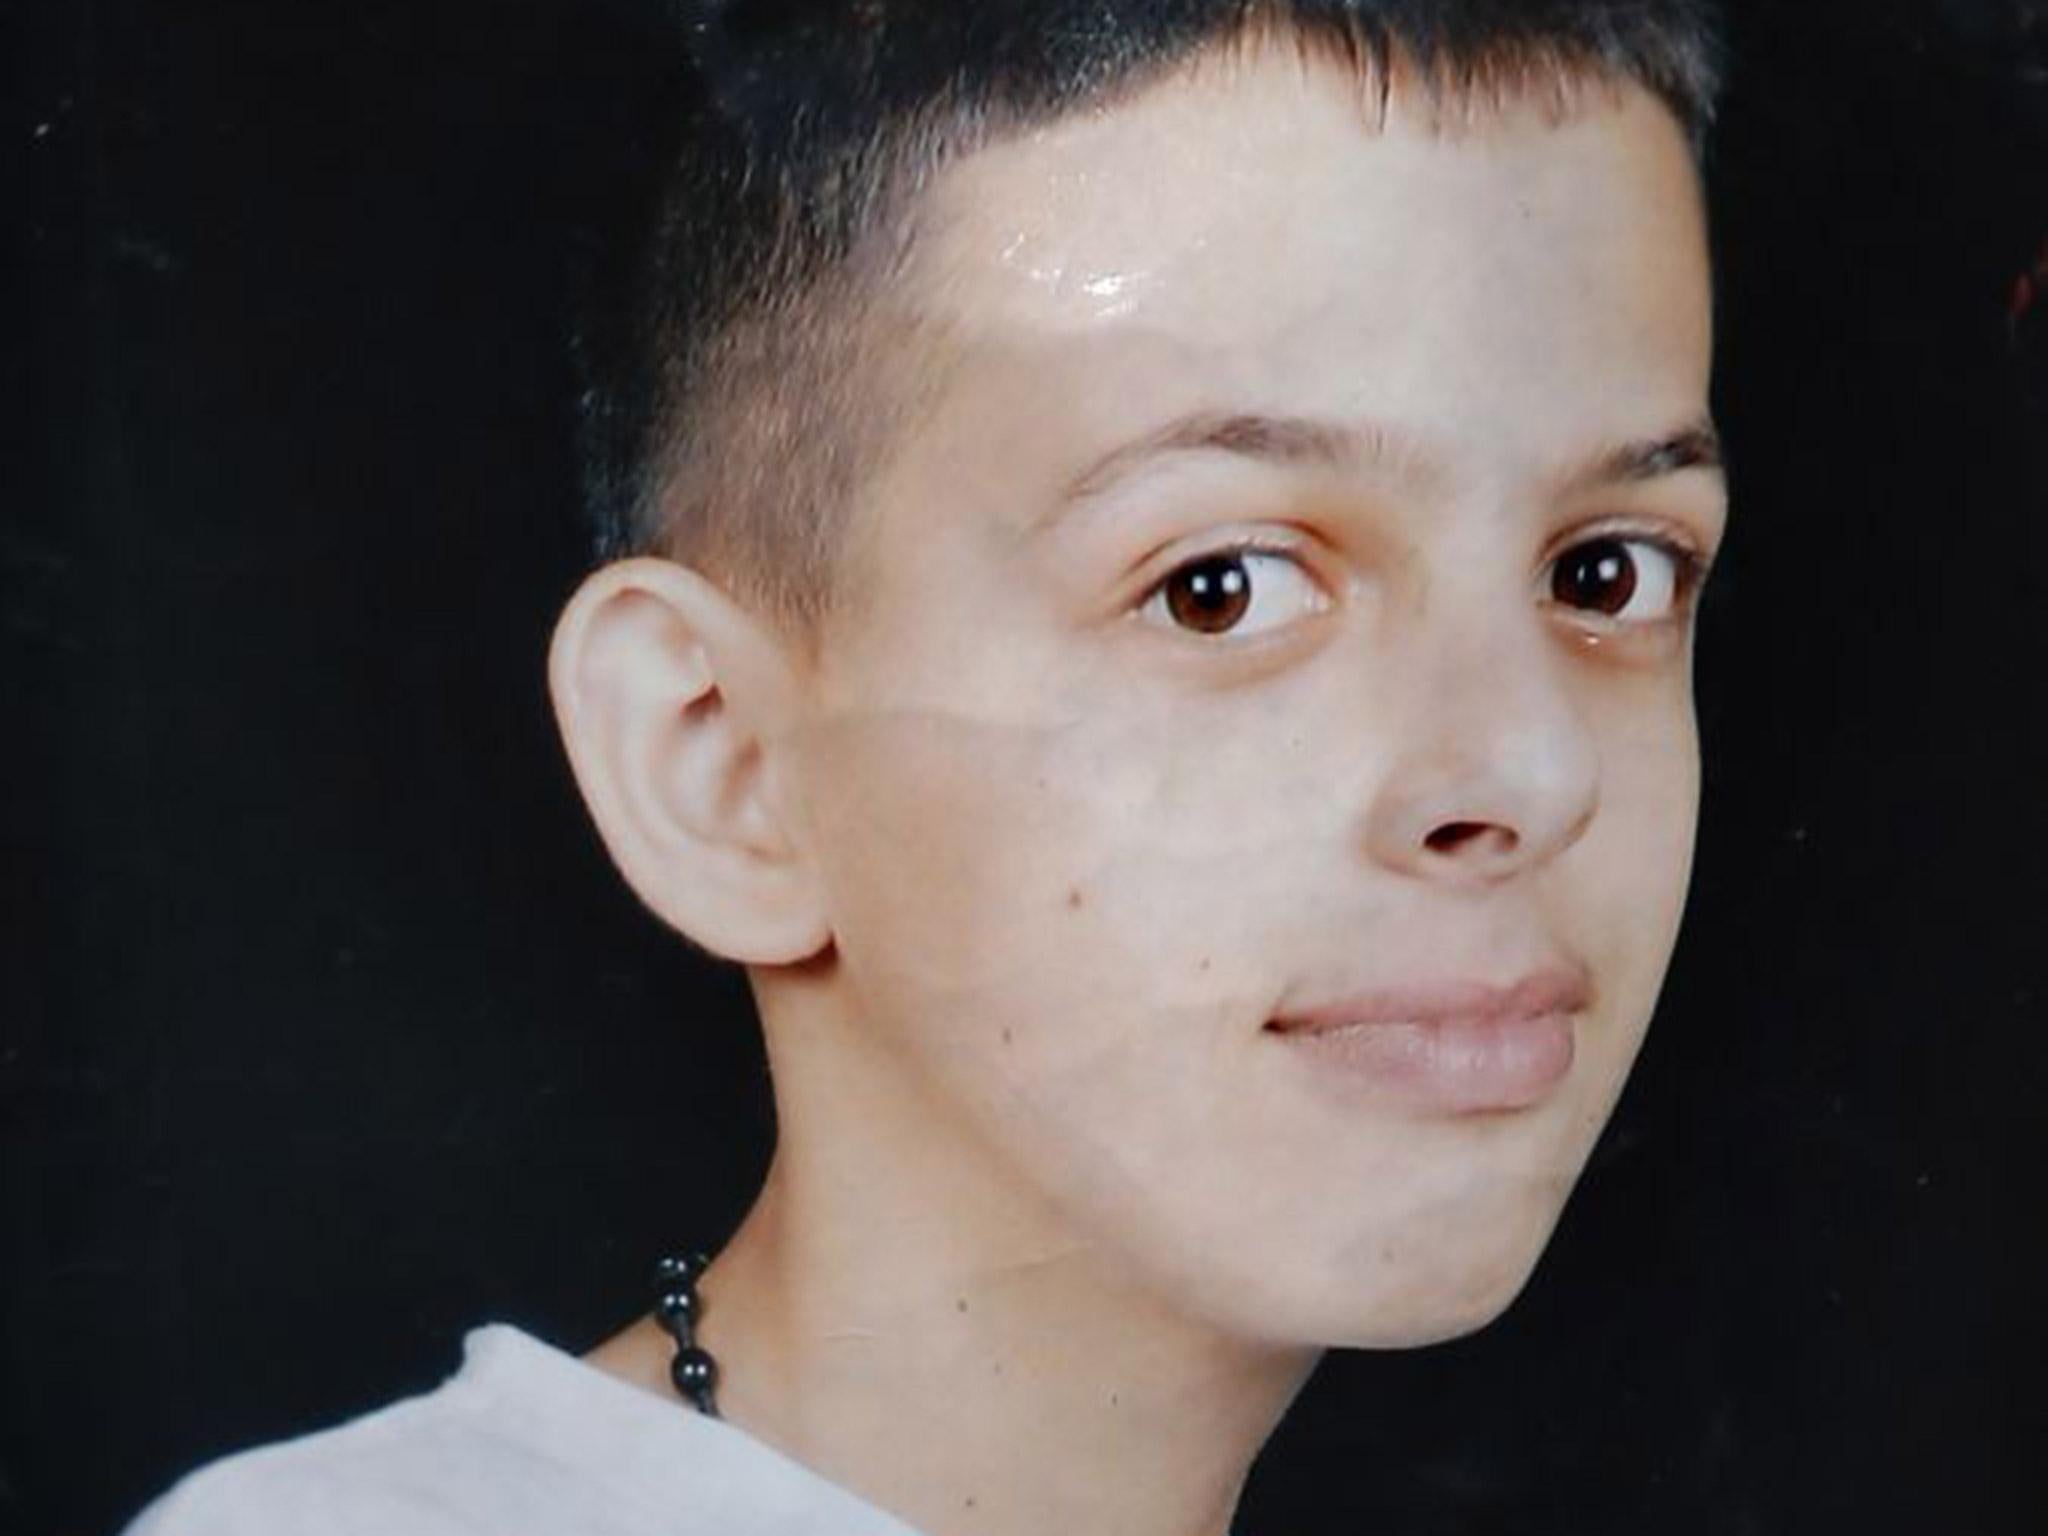 Six Jewish suspects have been arrested in connection with the killing of Mohammed Abu Khdeir, which Israeli police believe had "nationalistic motives".